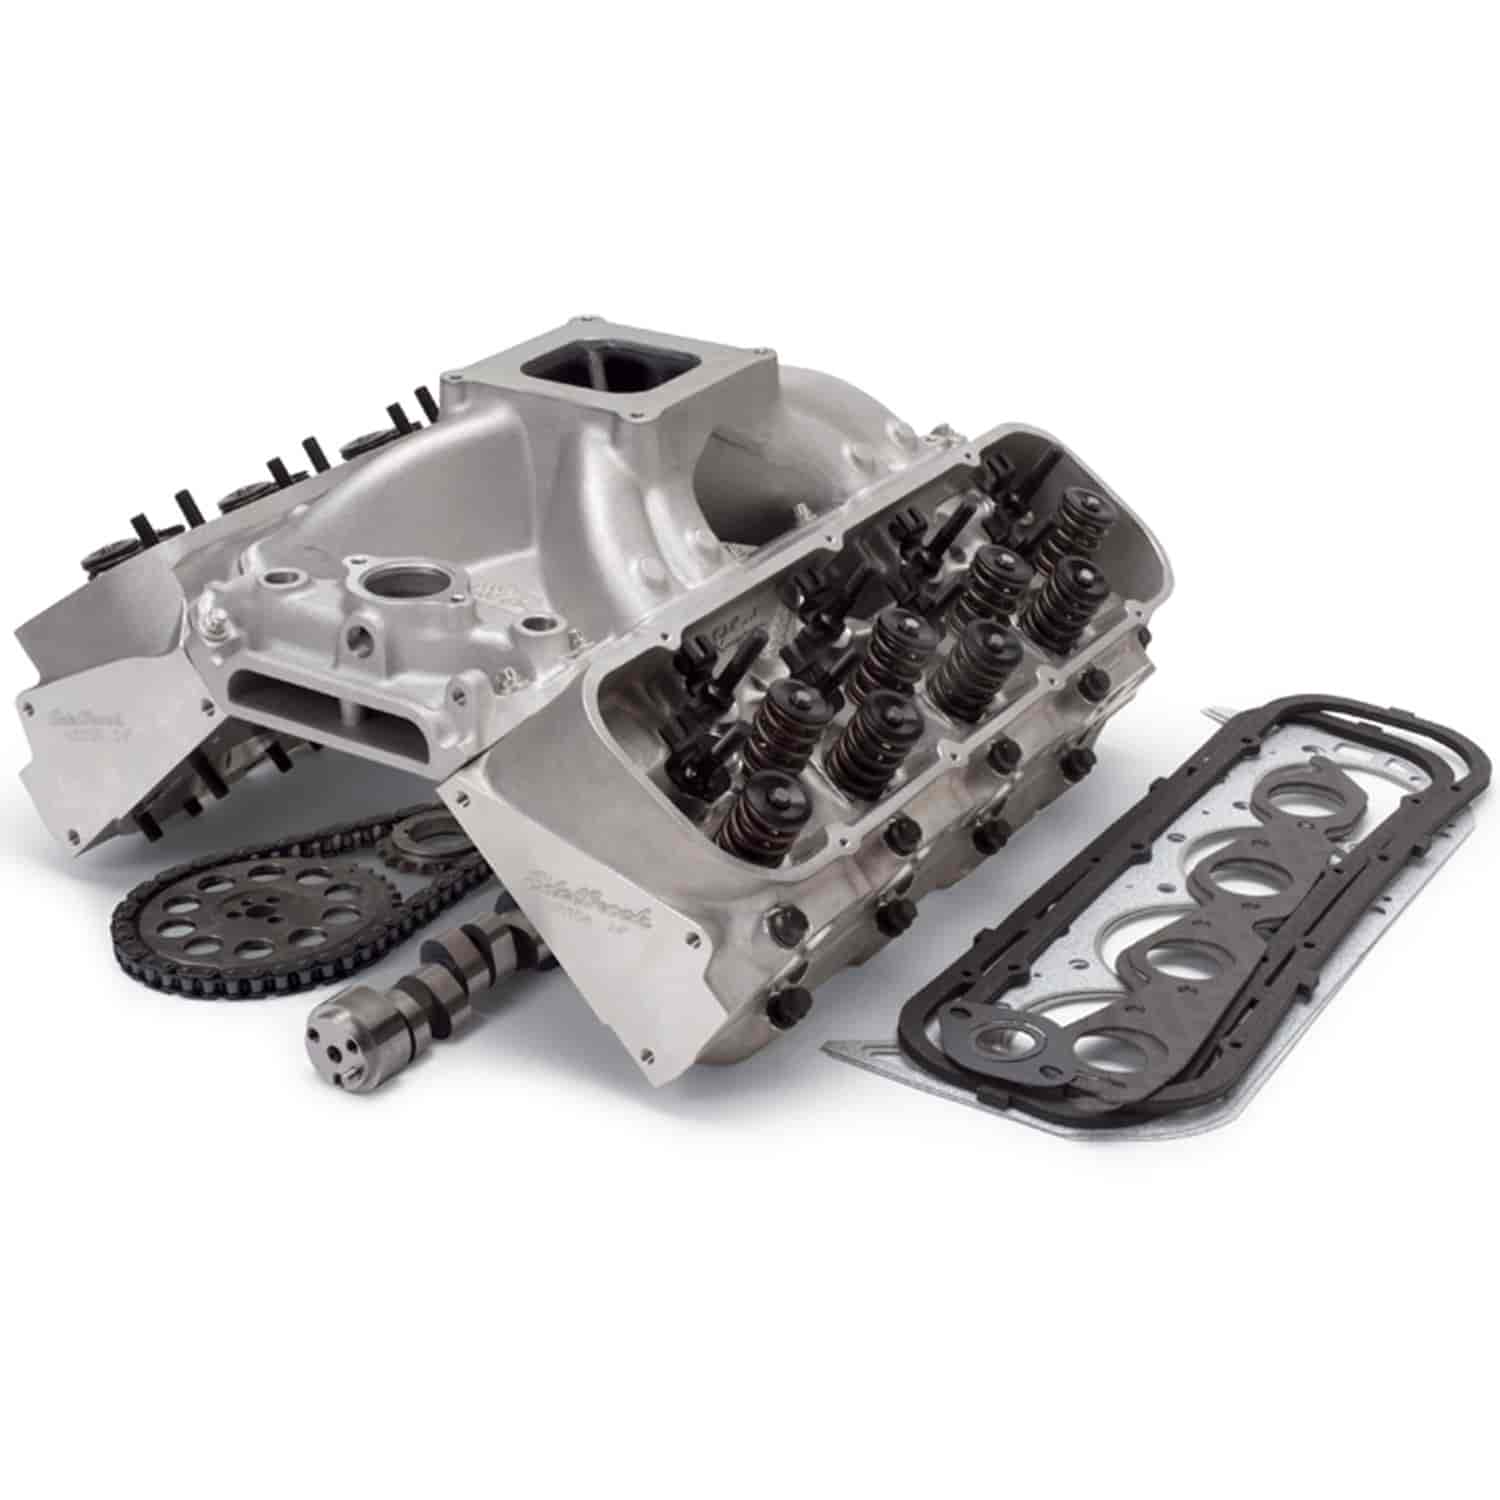 Victor Power Package Top End Kit for 1996-Later Big Block Chevy 496-555 Gen VI